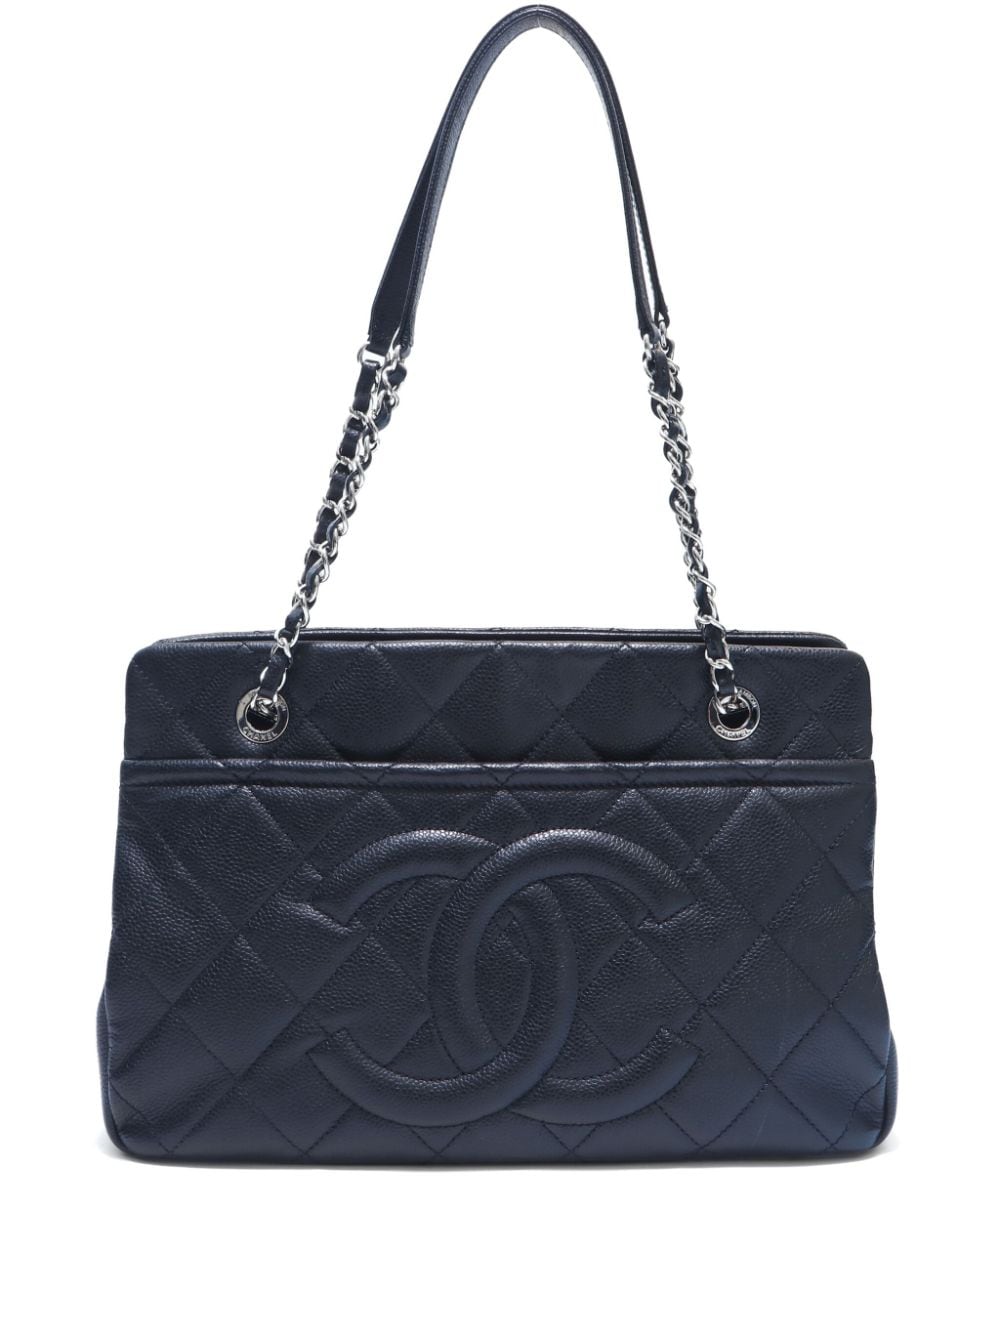 Pre-owned Chanel 2013 Timeless Tote Bag In Black